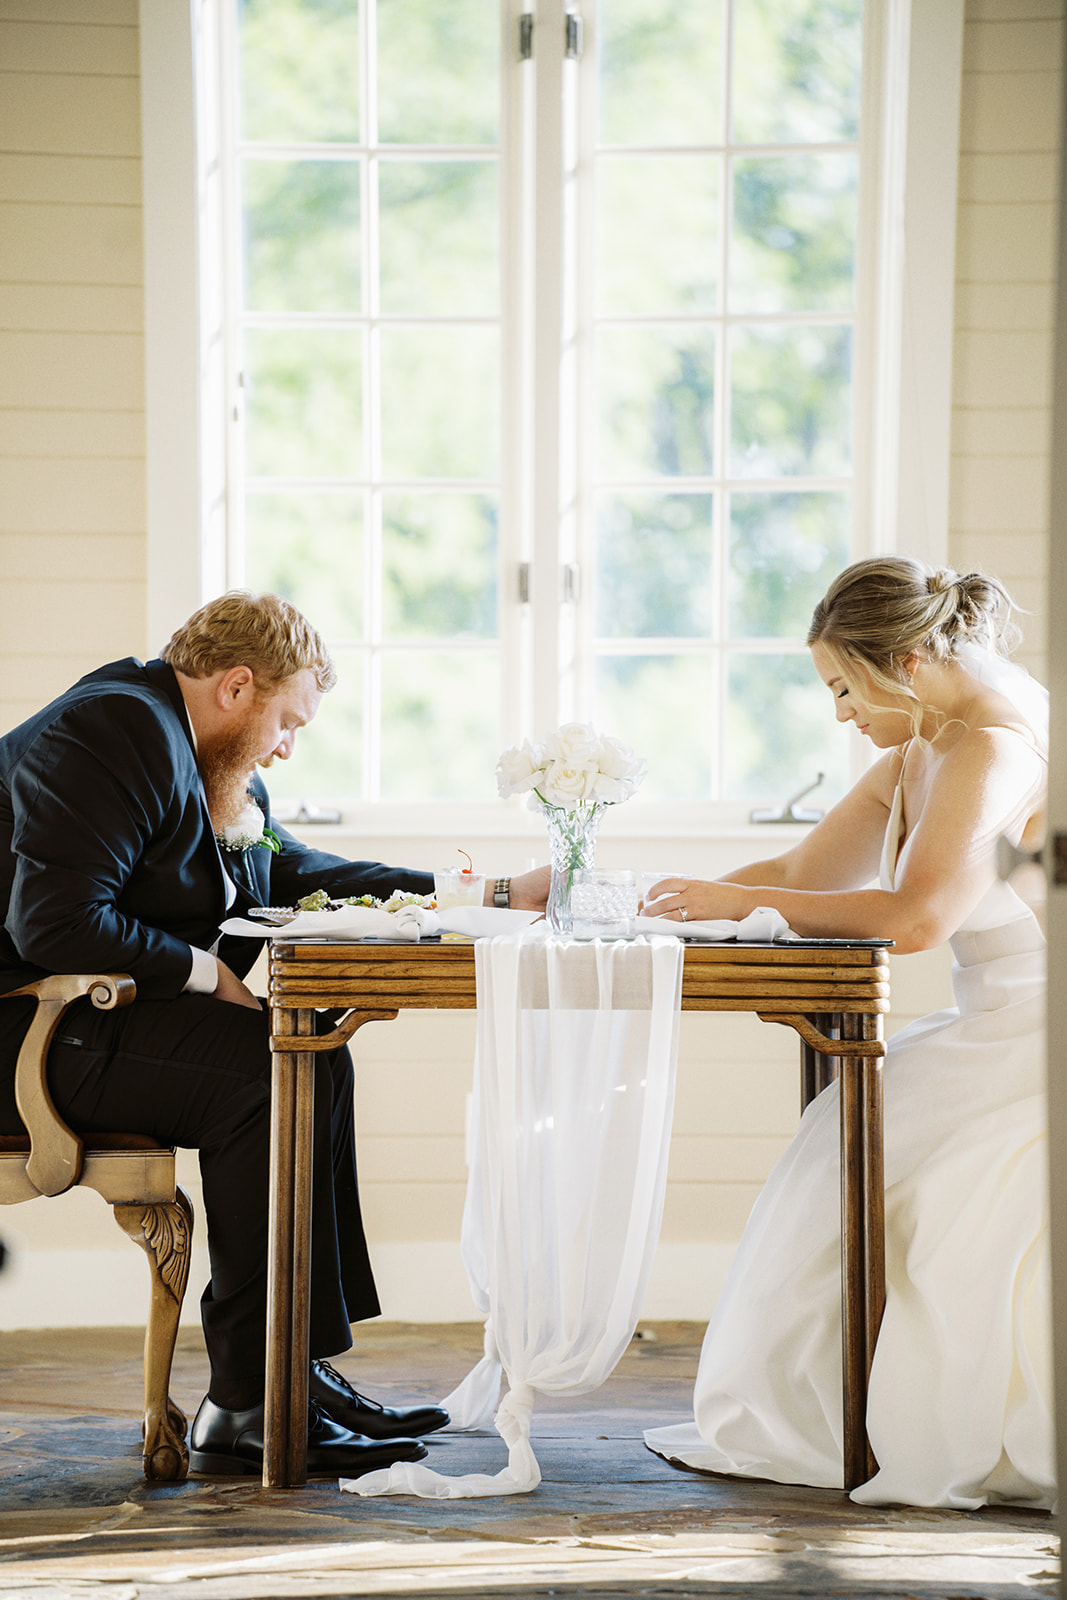 The bride and groom pray over their meal at Infinity Event Venue in Northeast Alabama